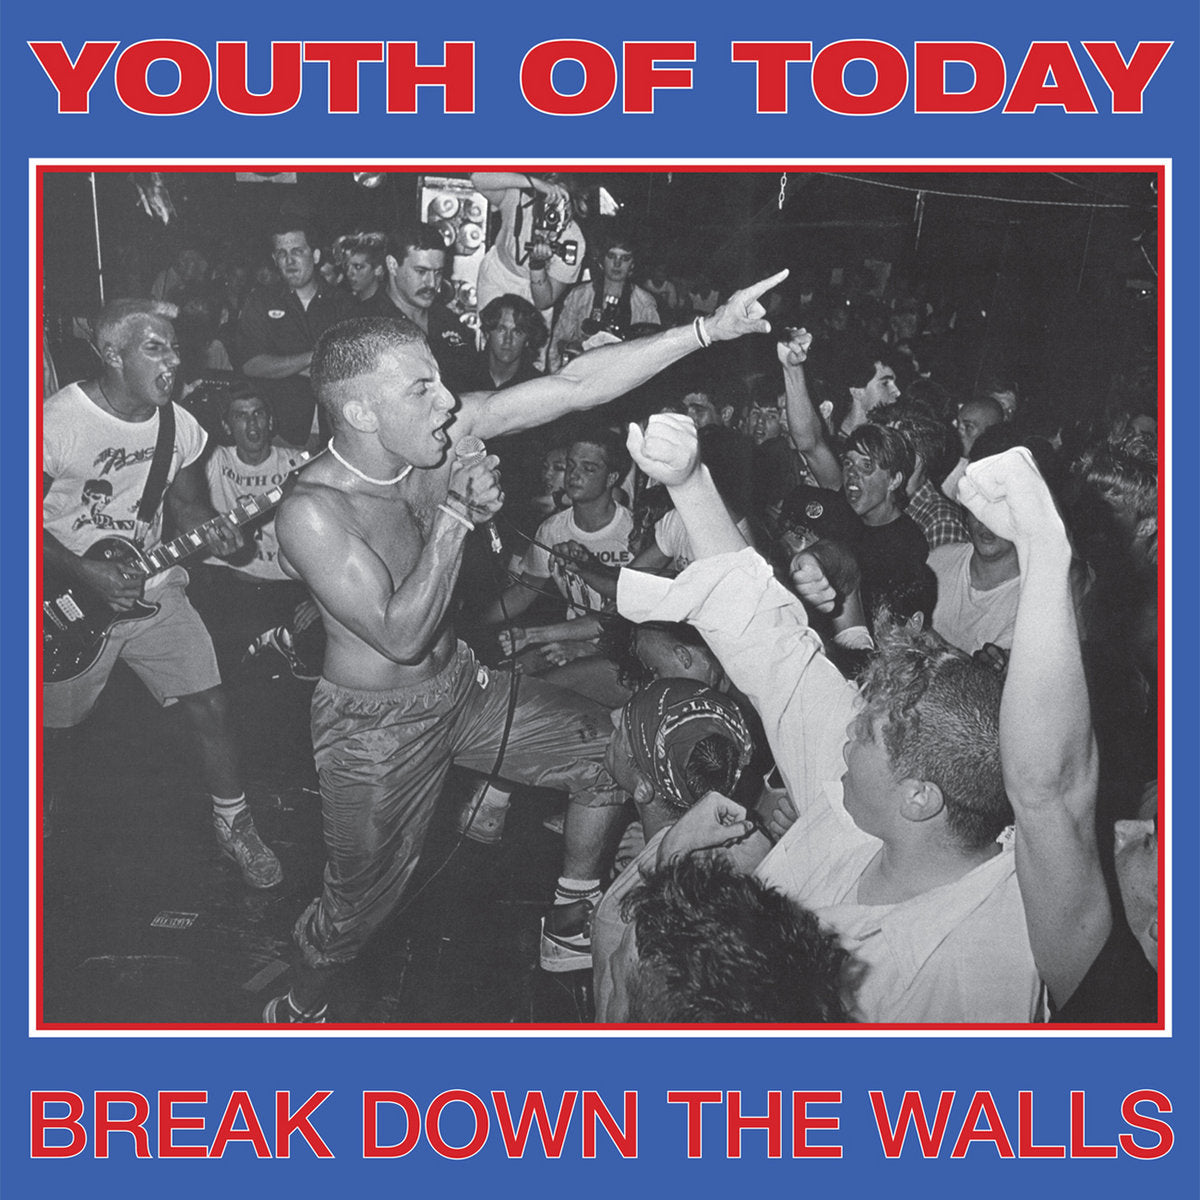 Youth Of Today "Break Down The Walls" LP